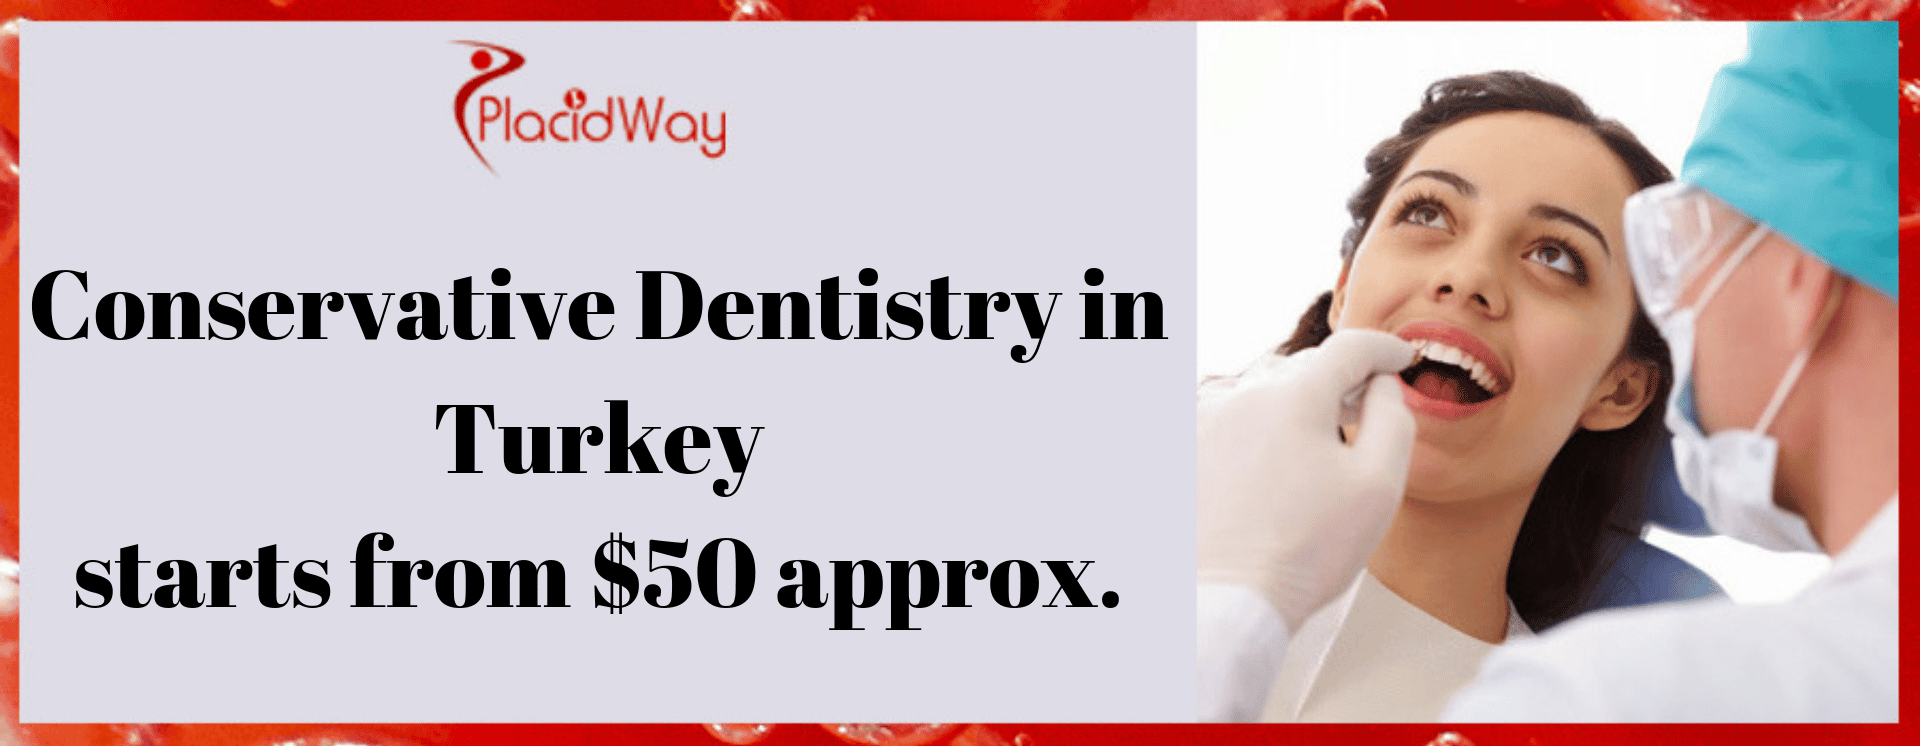 Conservative Dentistry in Turkey Cost